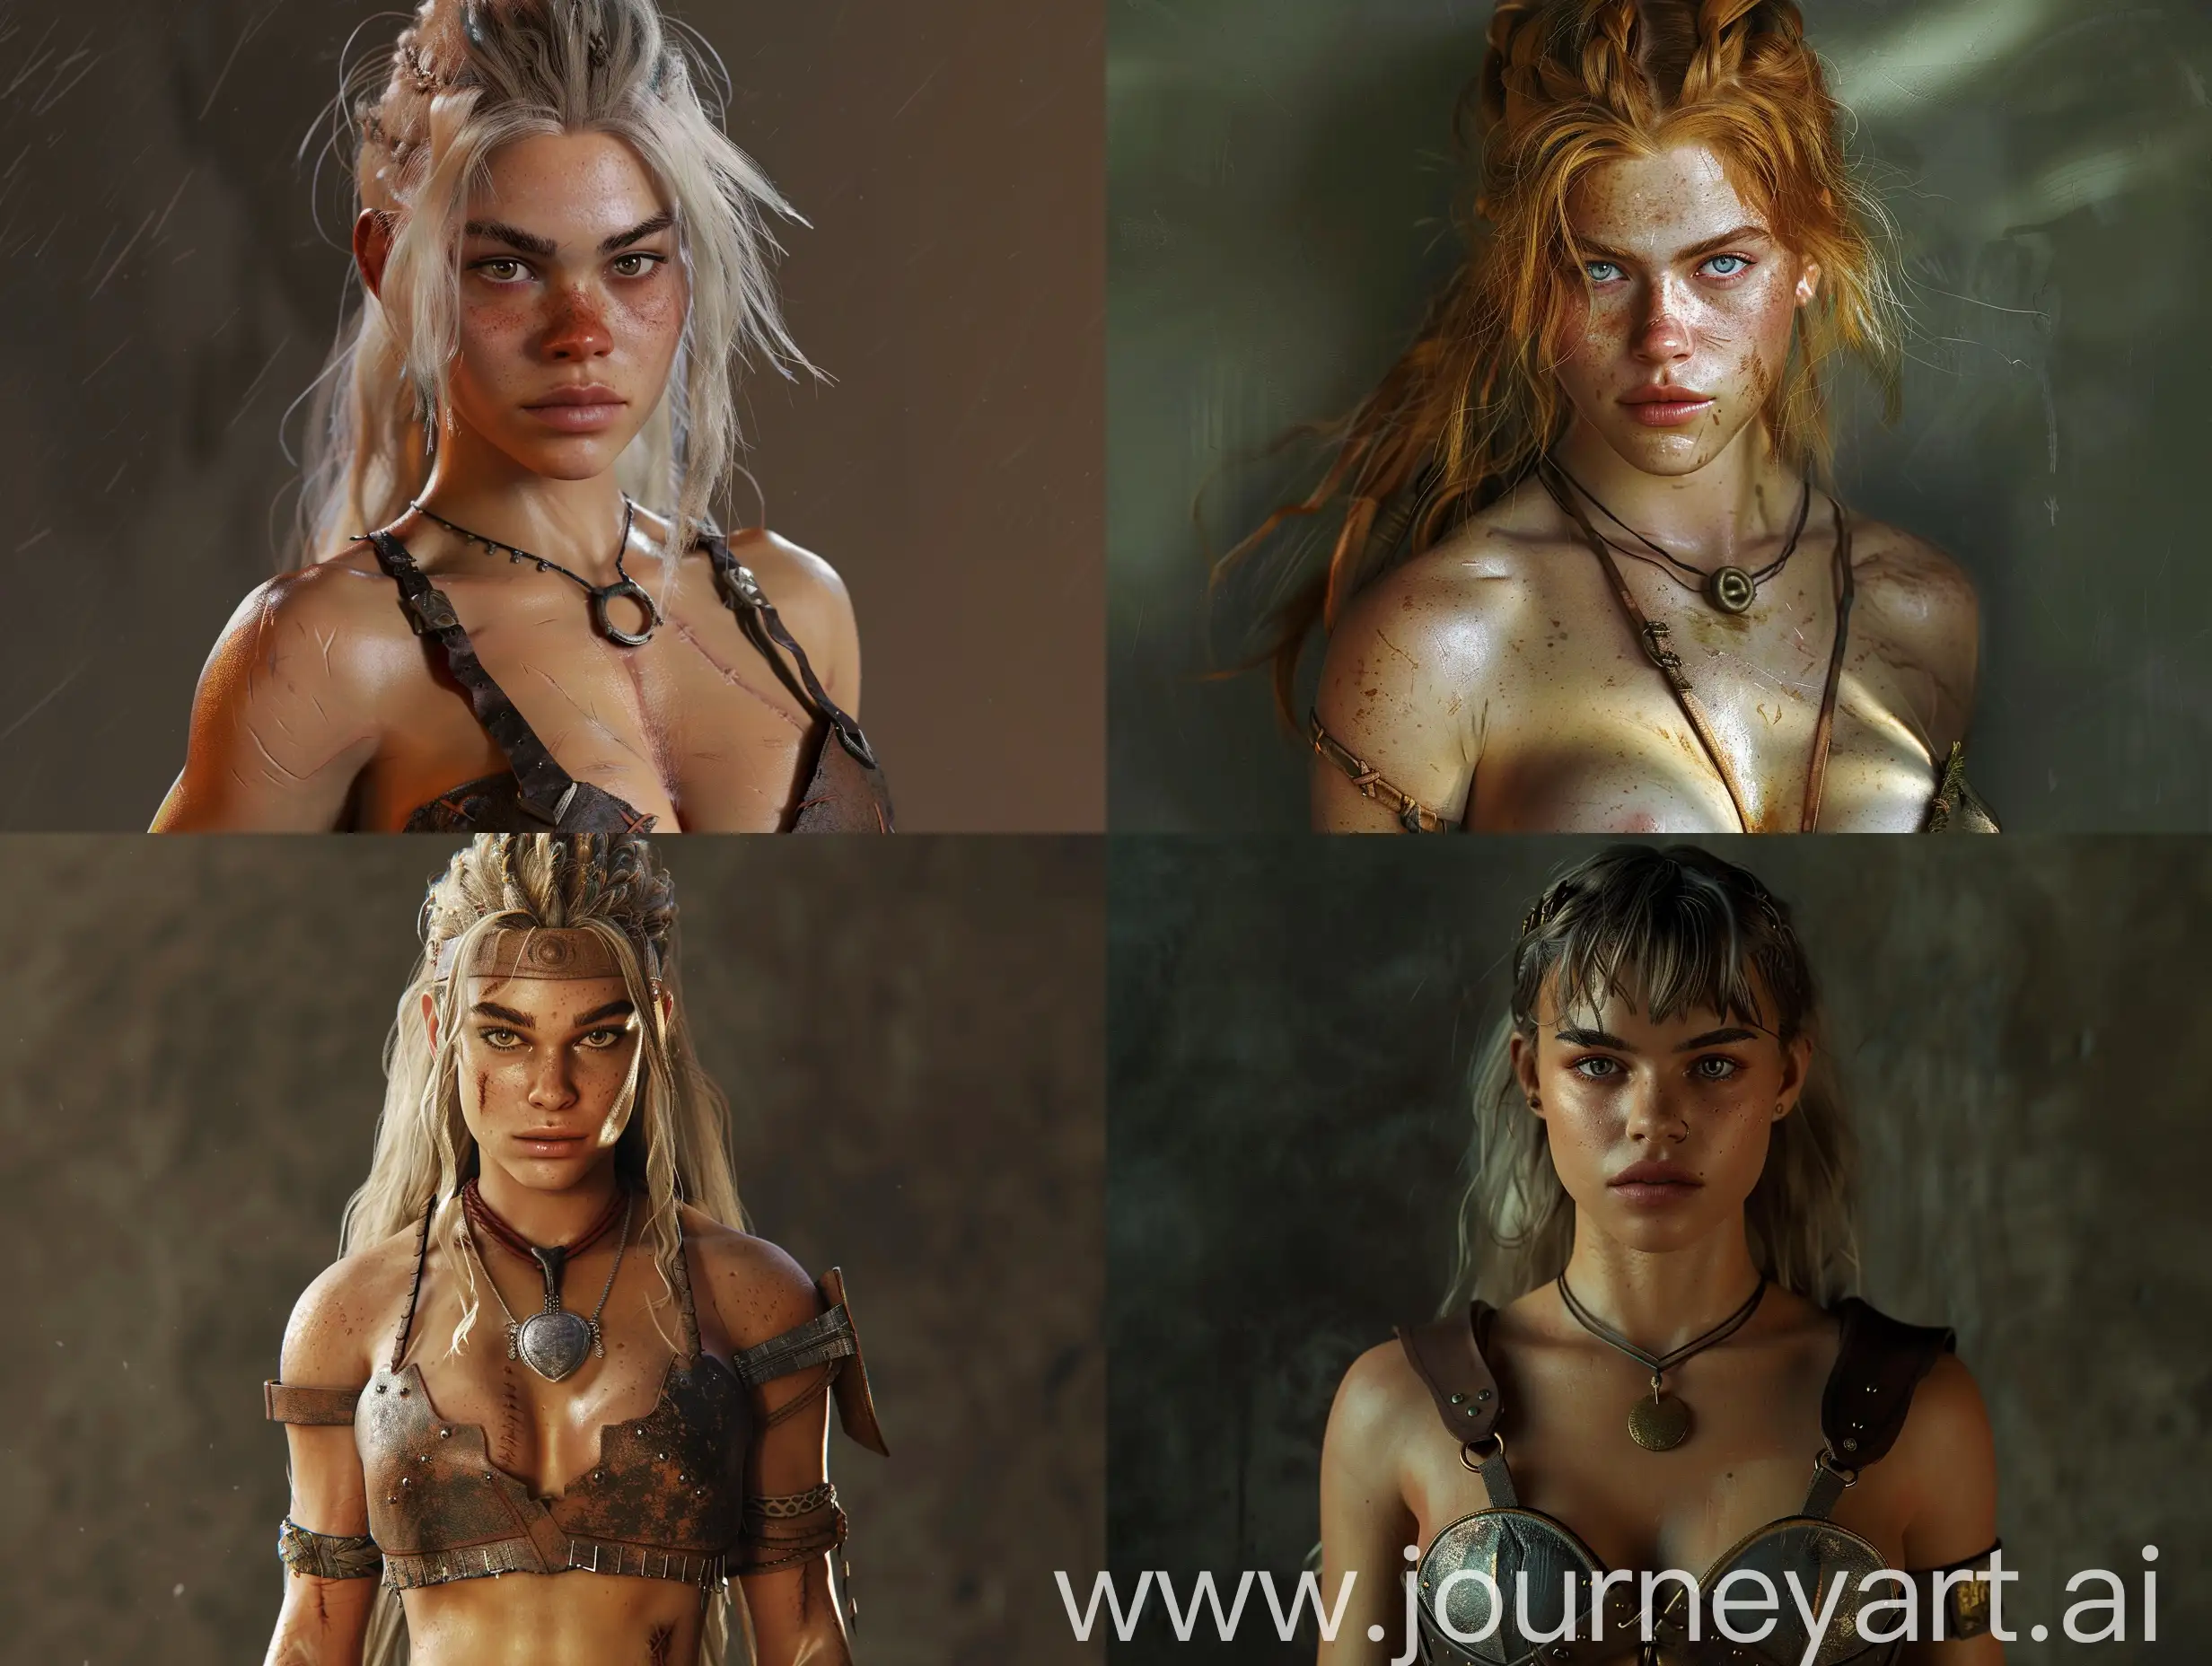 female barbarian with body like Brooke Ence and Paige VanZant and Julie Foucher and Katrin Tanja Davidsdottir and Elle Fanning and Keri Russell and Cara Delevingne and Teresa Palmer, small breasts, sun-bleached hair, comely heart-shaped face, deep eyes, button nose, defined jawline, textured skin, SSS, high dynamic range, exposure blending, realistic shadows 